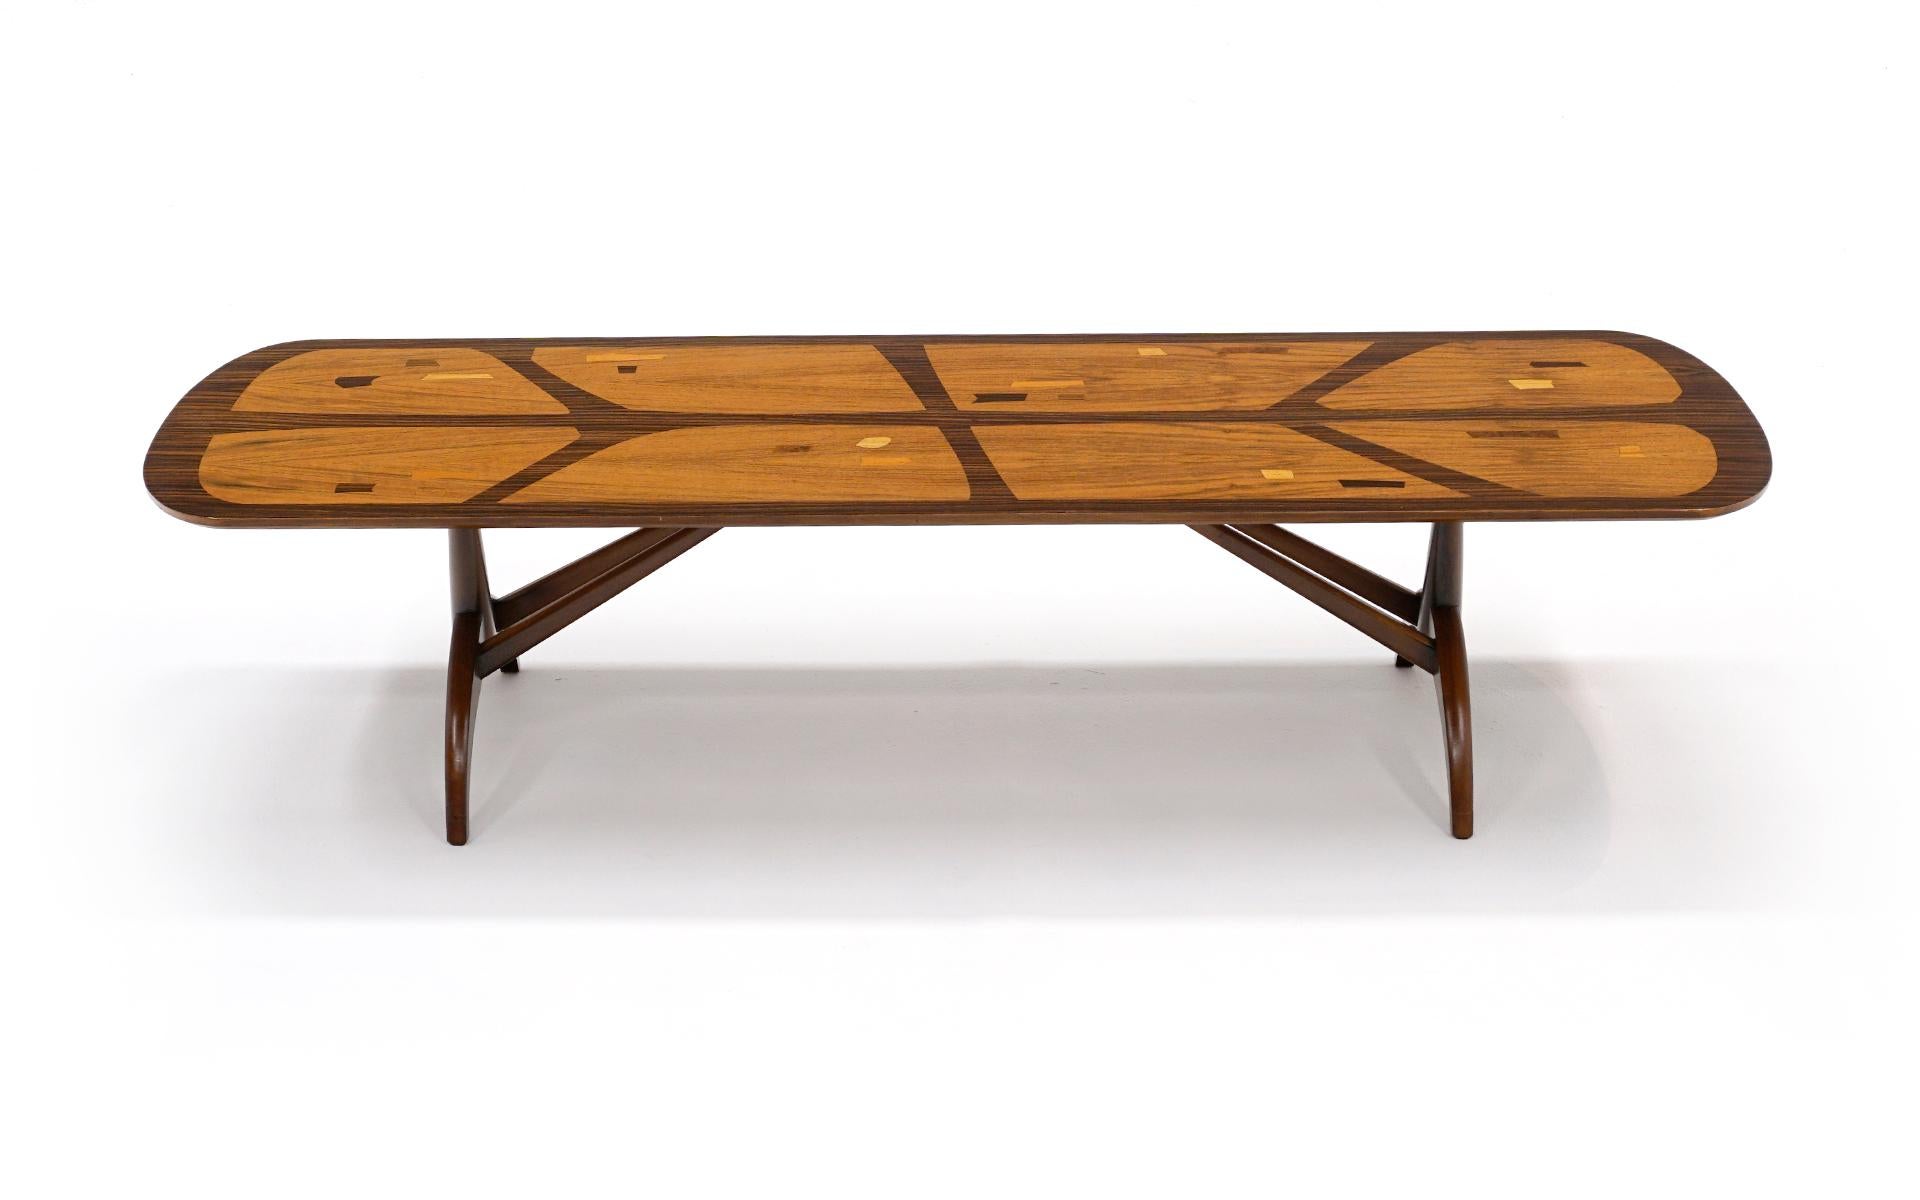 Coffee table with beautiful inlayed designs, likely from Brazil. Rosewood, walnut and mahogany. Rectangular form with rounded corners. Quite possibly one of a kind.